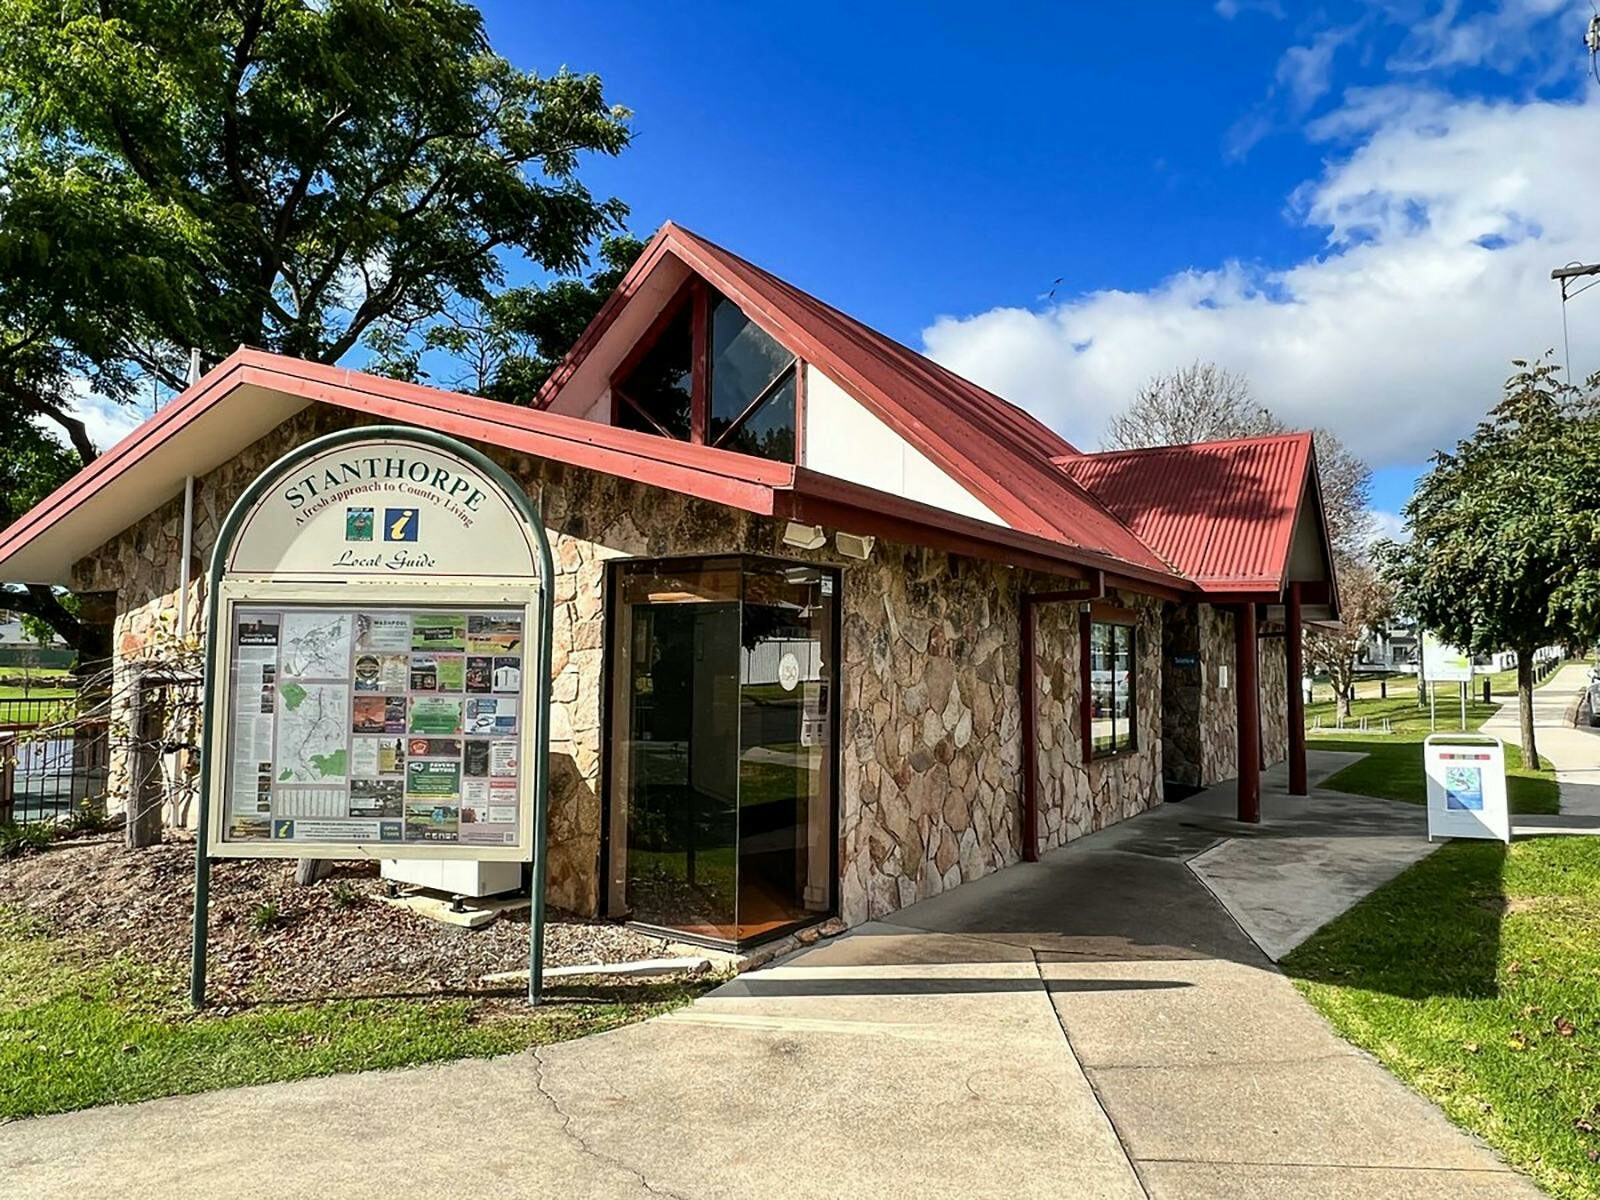 Stanthorpe Visitor Information Centre Welcome